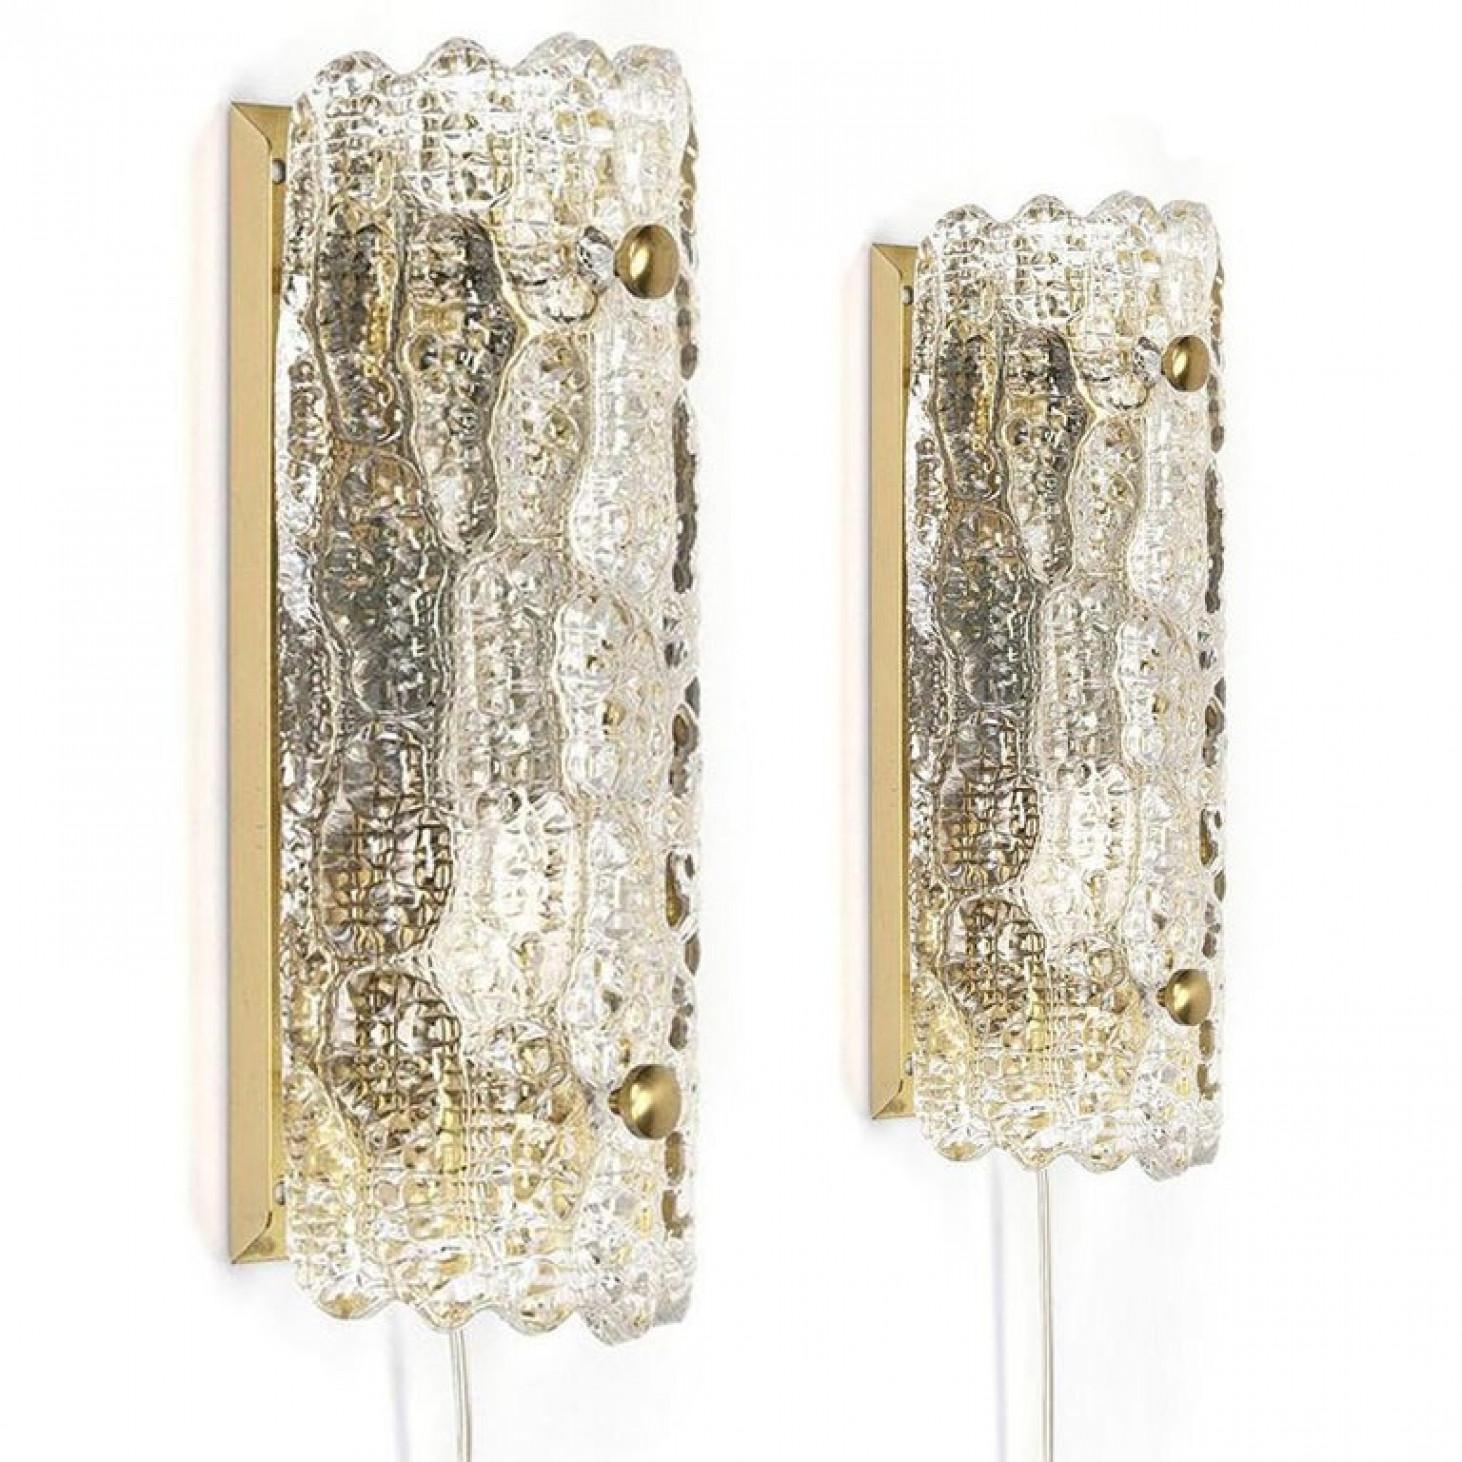 Fantastic pair of mid-century nice textured glass wall lights by Carl Fagerlund for Orrefors.

Height: 11 inches / 28 cm Width: 4.5 inches / 11,5 cm Depth: 2.8 inches / 7 cm Weight: 1,2 kg.
In very good vintage condition. Cleaned well wired and